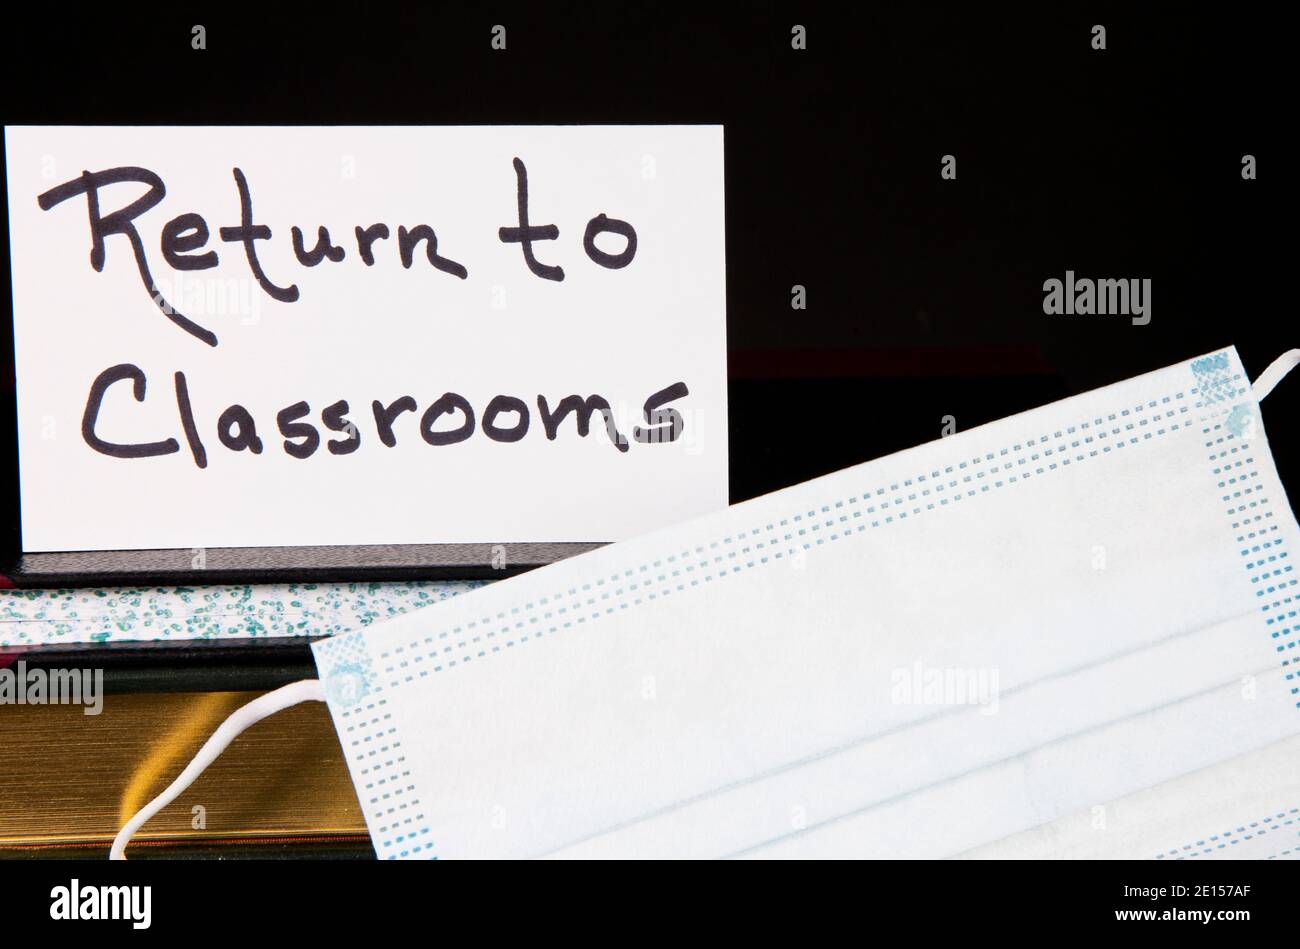 Return to Classrooms note placed with face mask and books reflect public health and education policy needs as schools reopen. Stock Photo